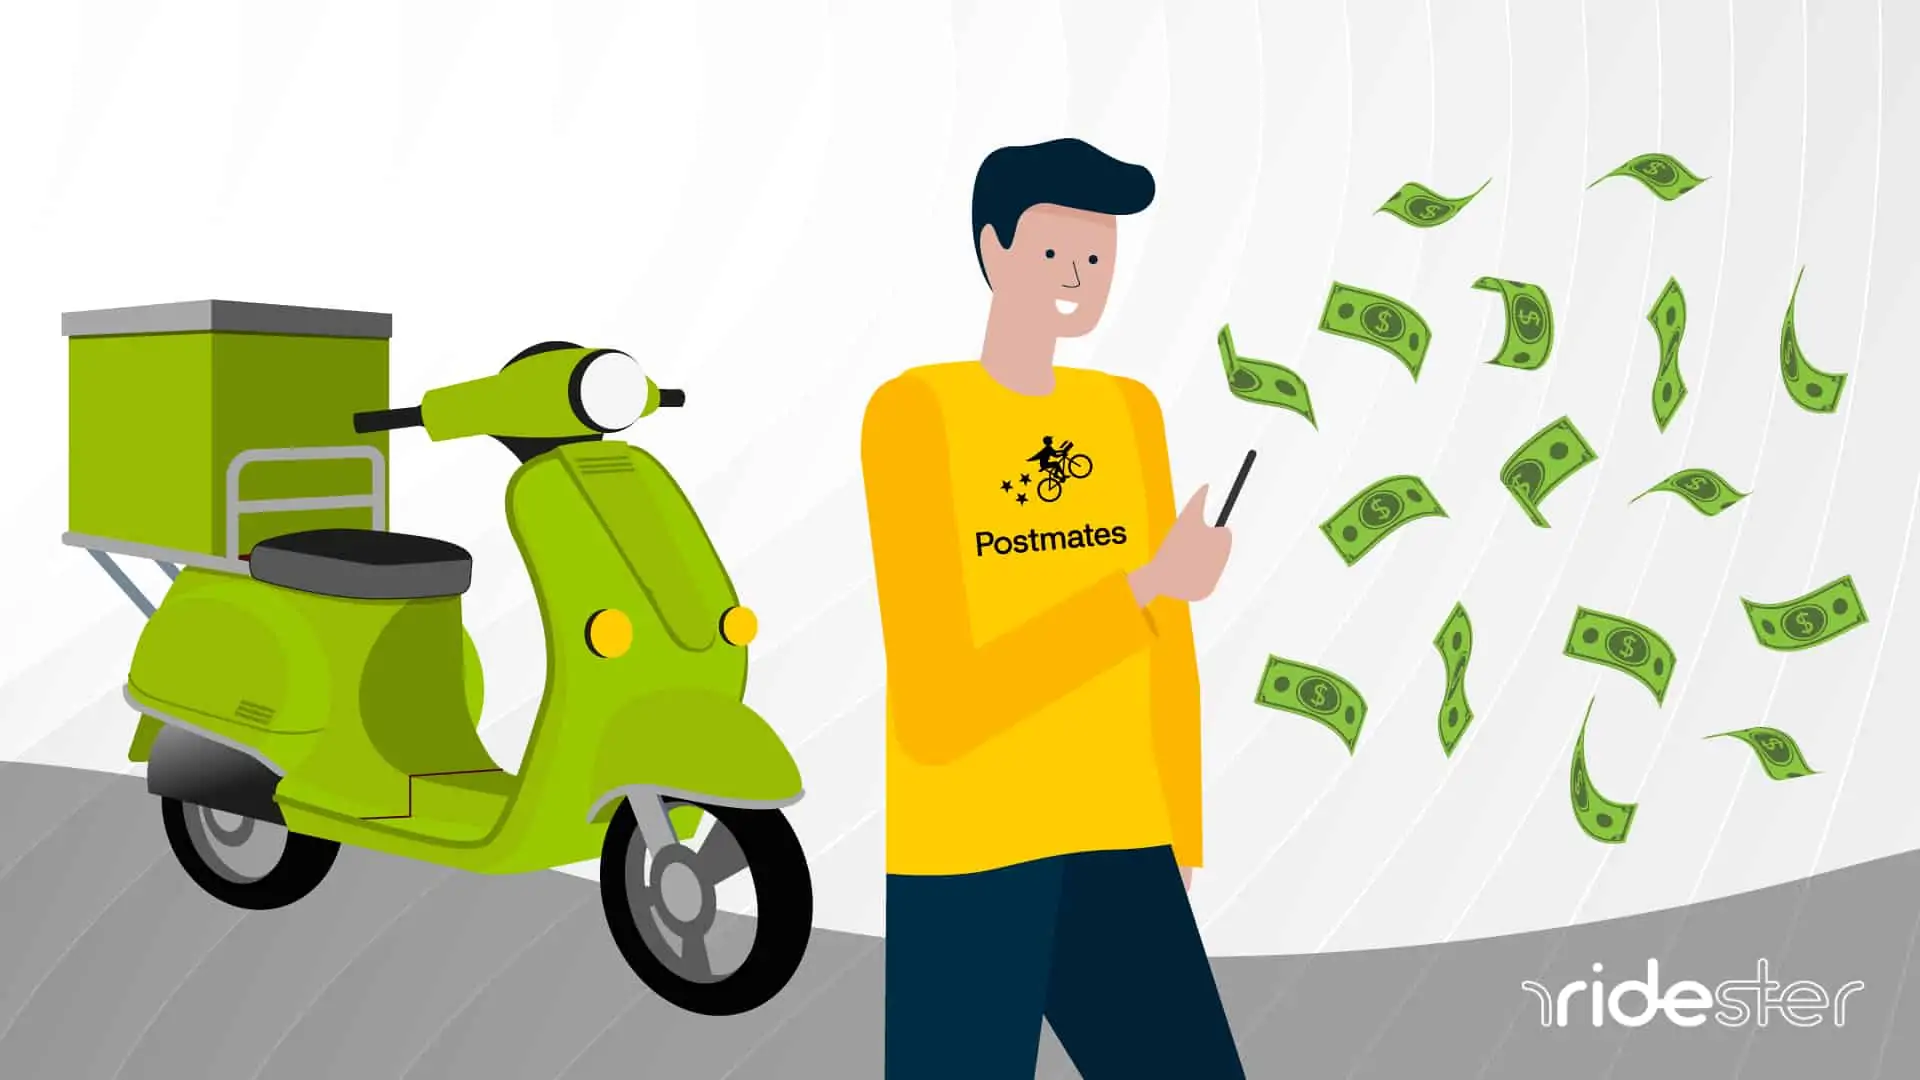 vector image of a man holding a smartphone wearing a postmates shirt to show how much does postmates pay point